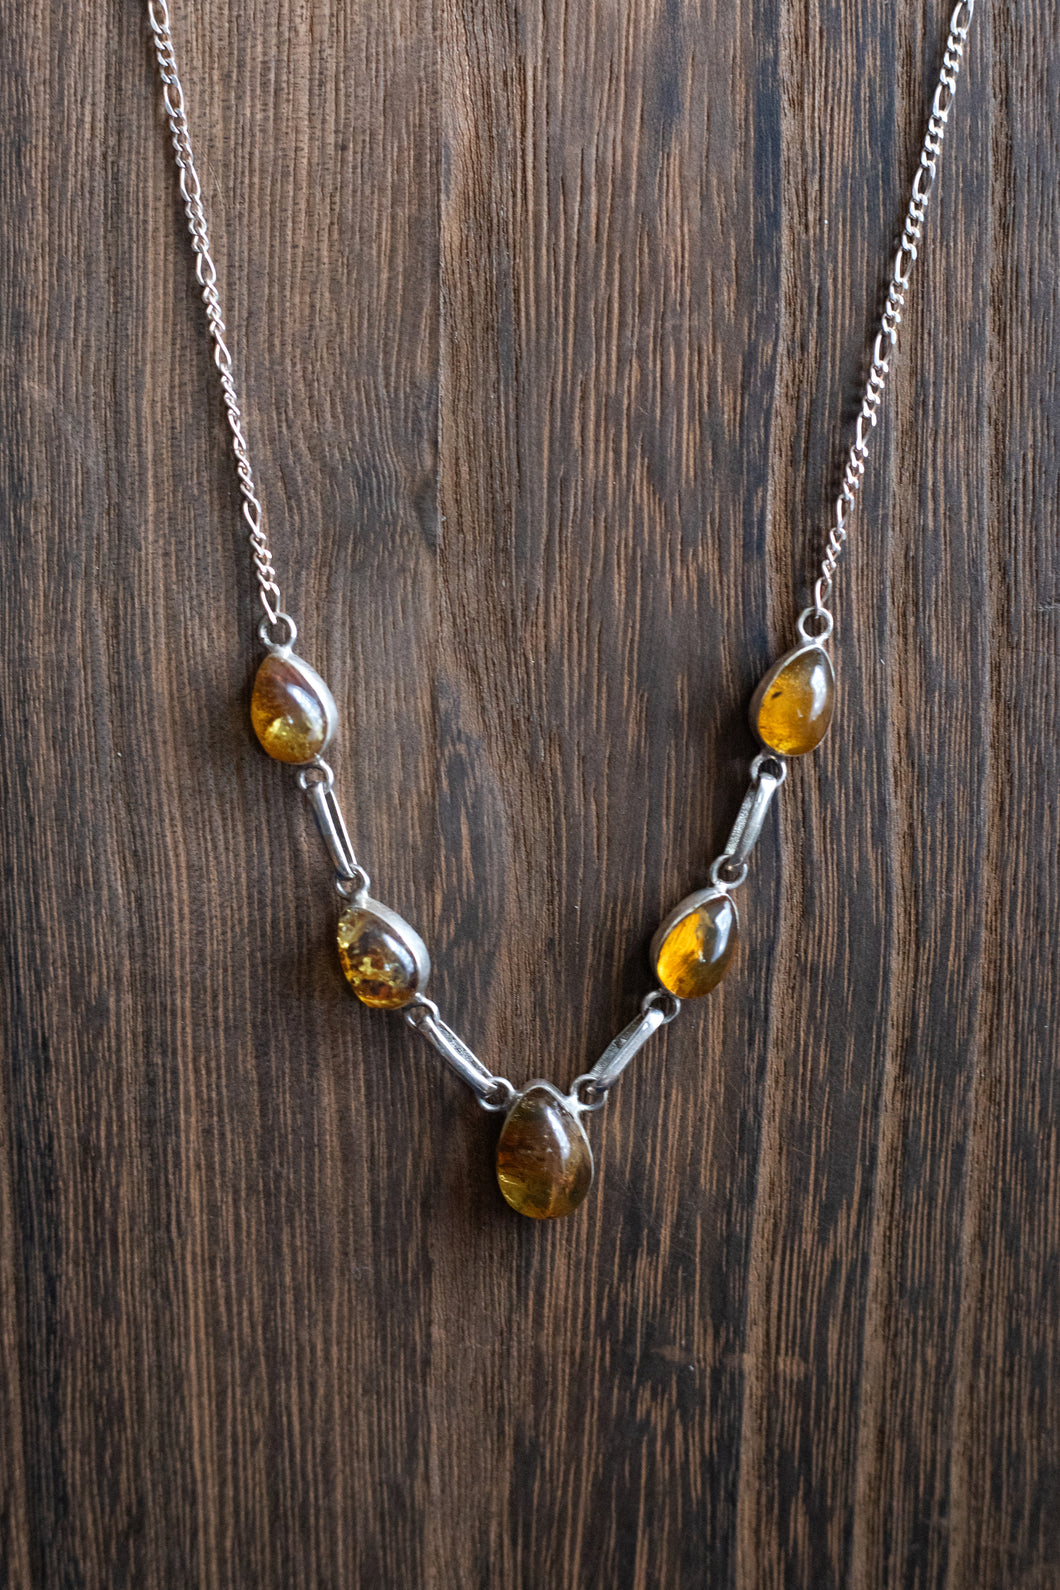 5 Elements Amber Necklace